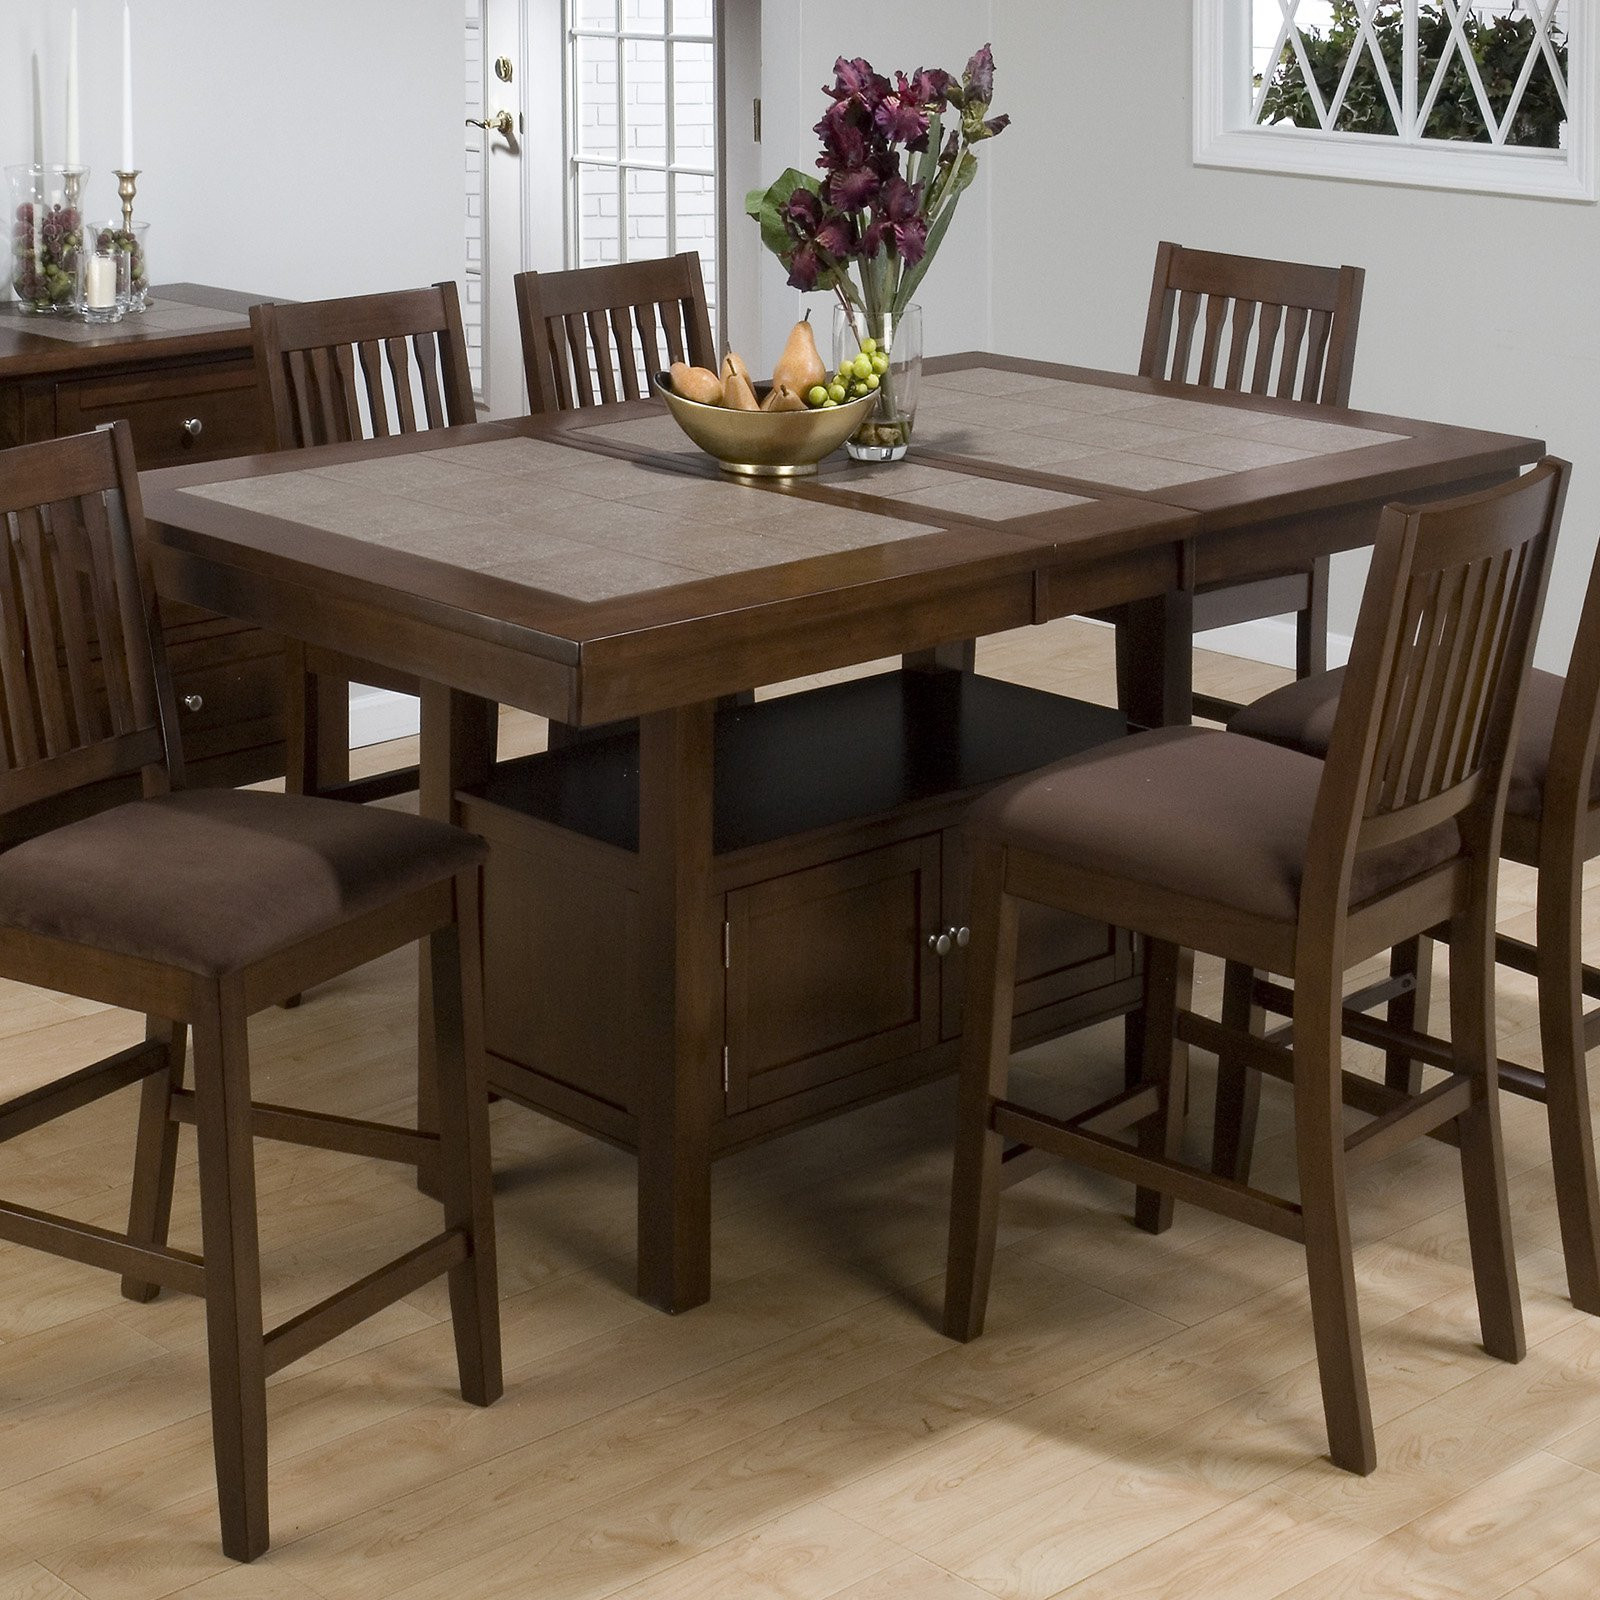 Kitchen Tables With Storage
 Jofran Trumbull Tile Top Counter Height Storage Dining